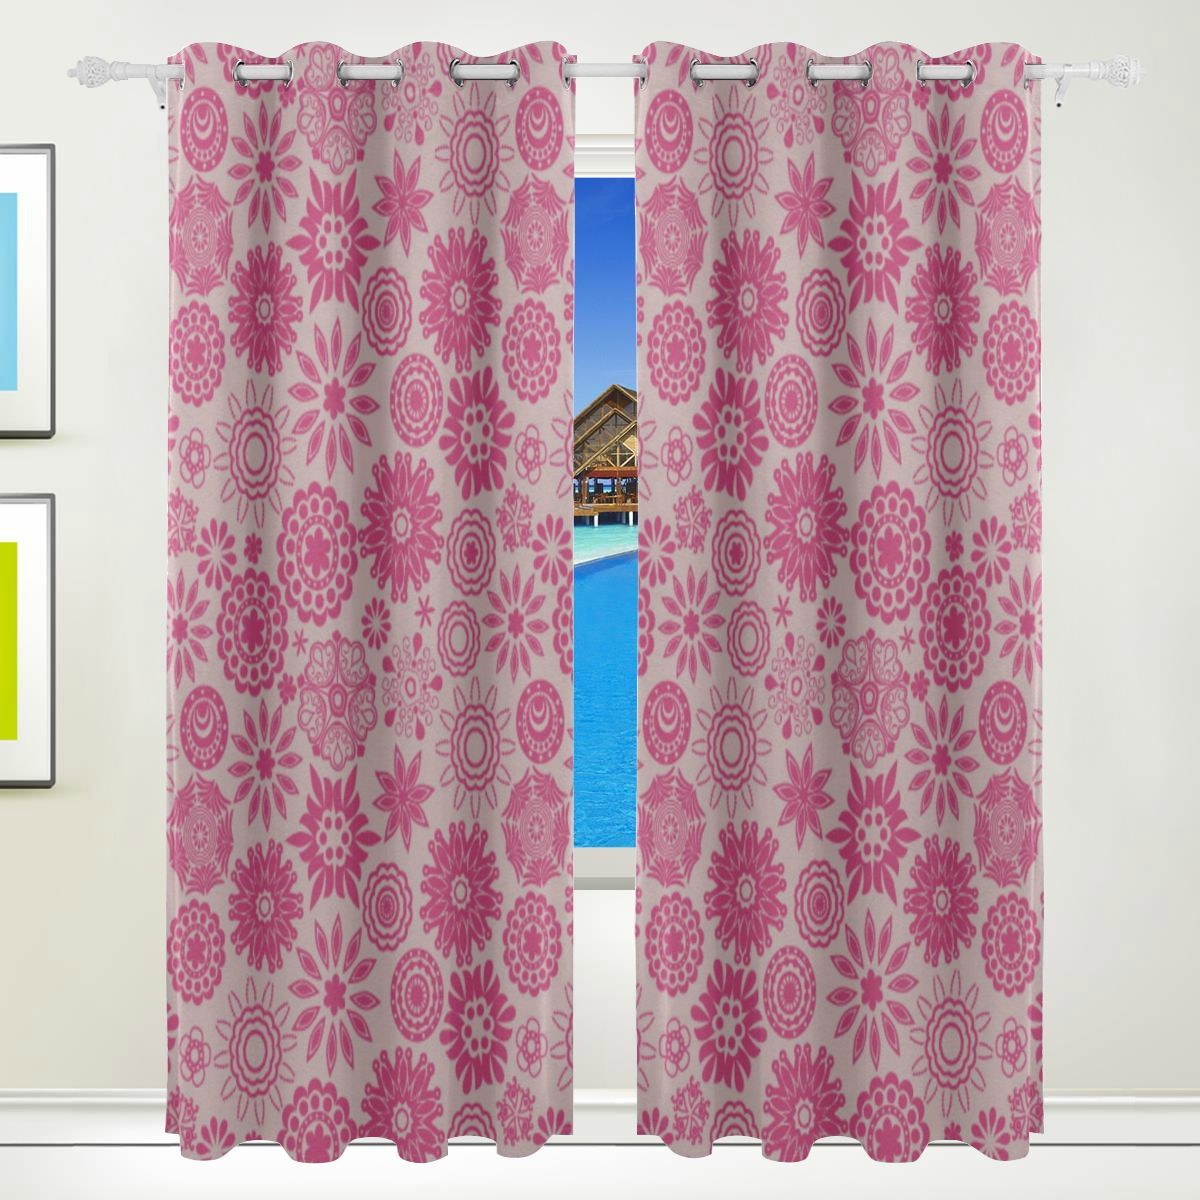 Blackout Curtains Window Pink Sweet Floral Flowers Print Curtains For